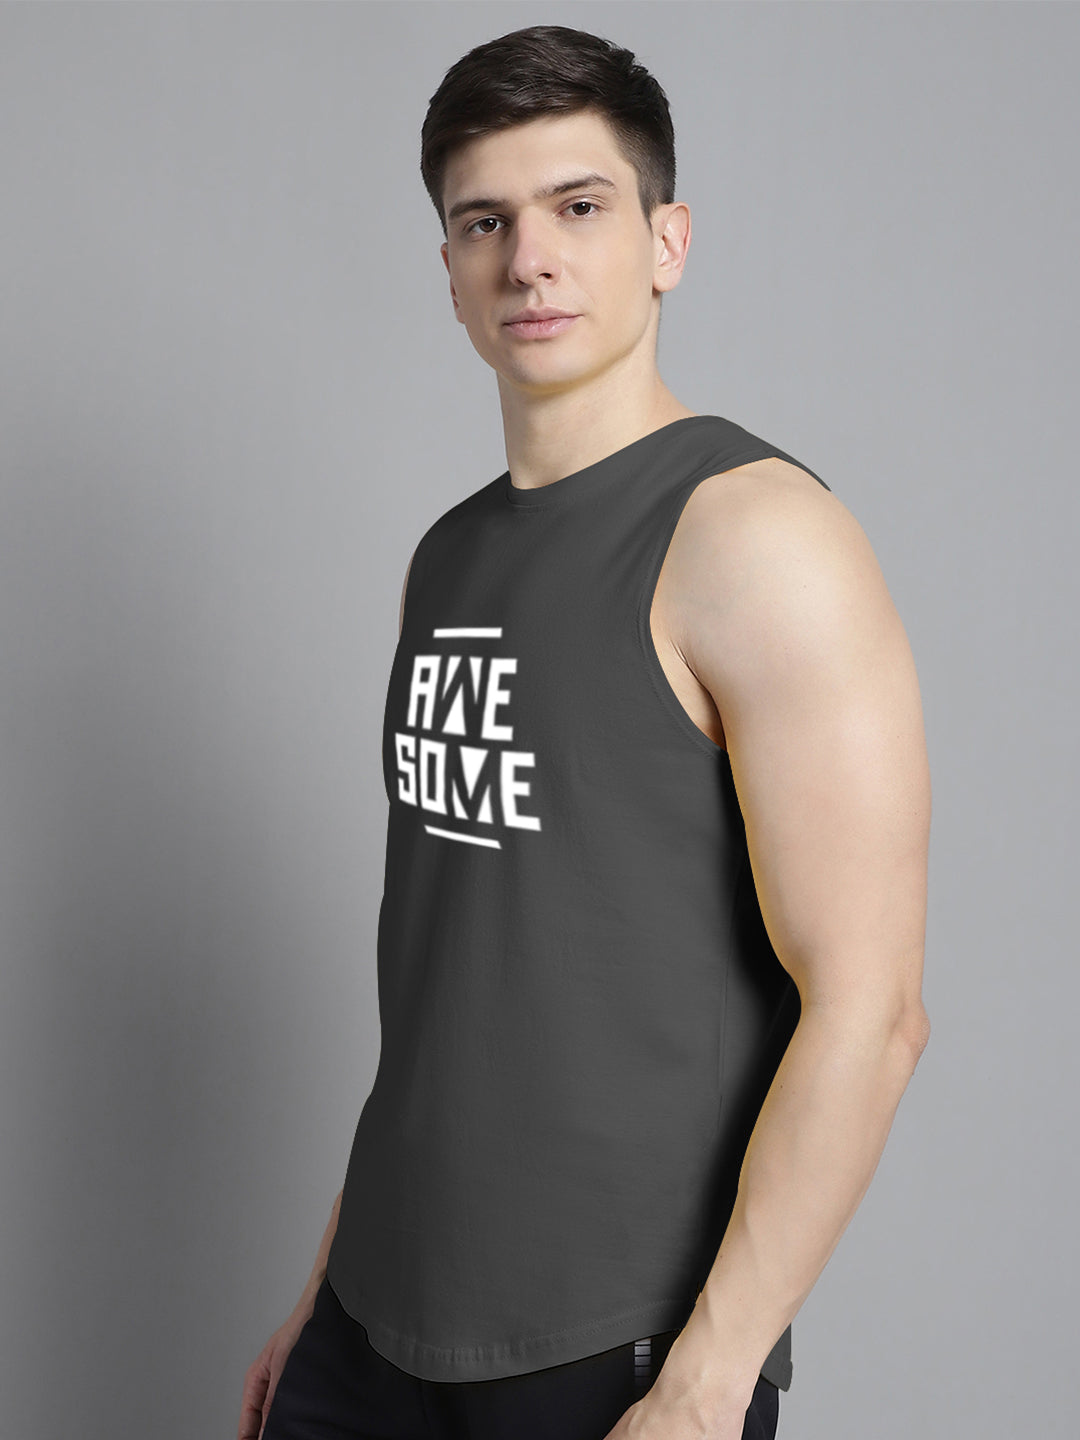 Fbar Awesome printed Pure Cotton Training Vest - Friskers